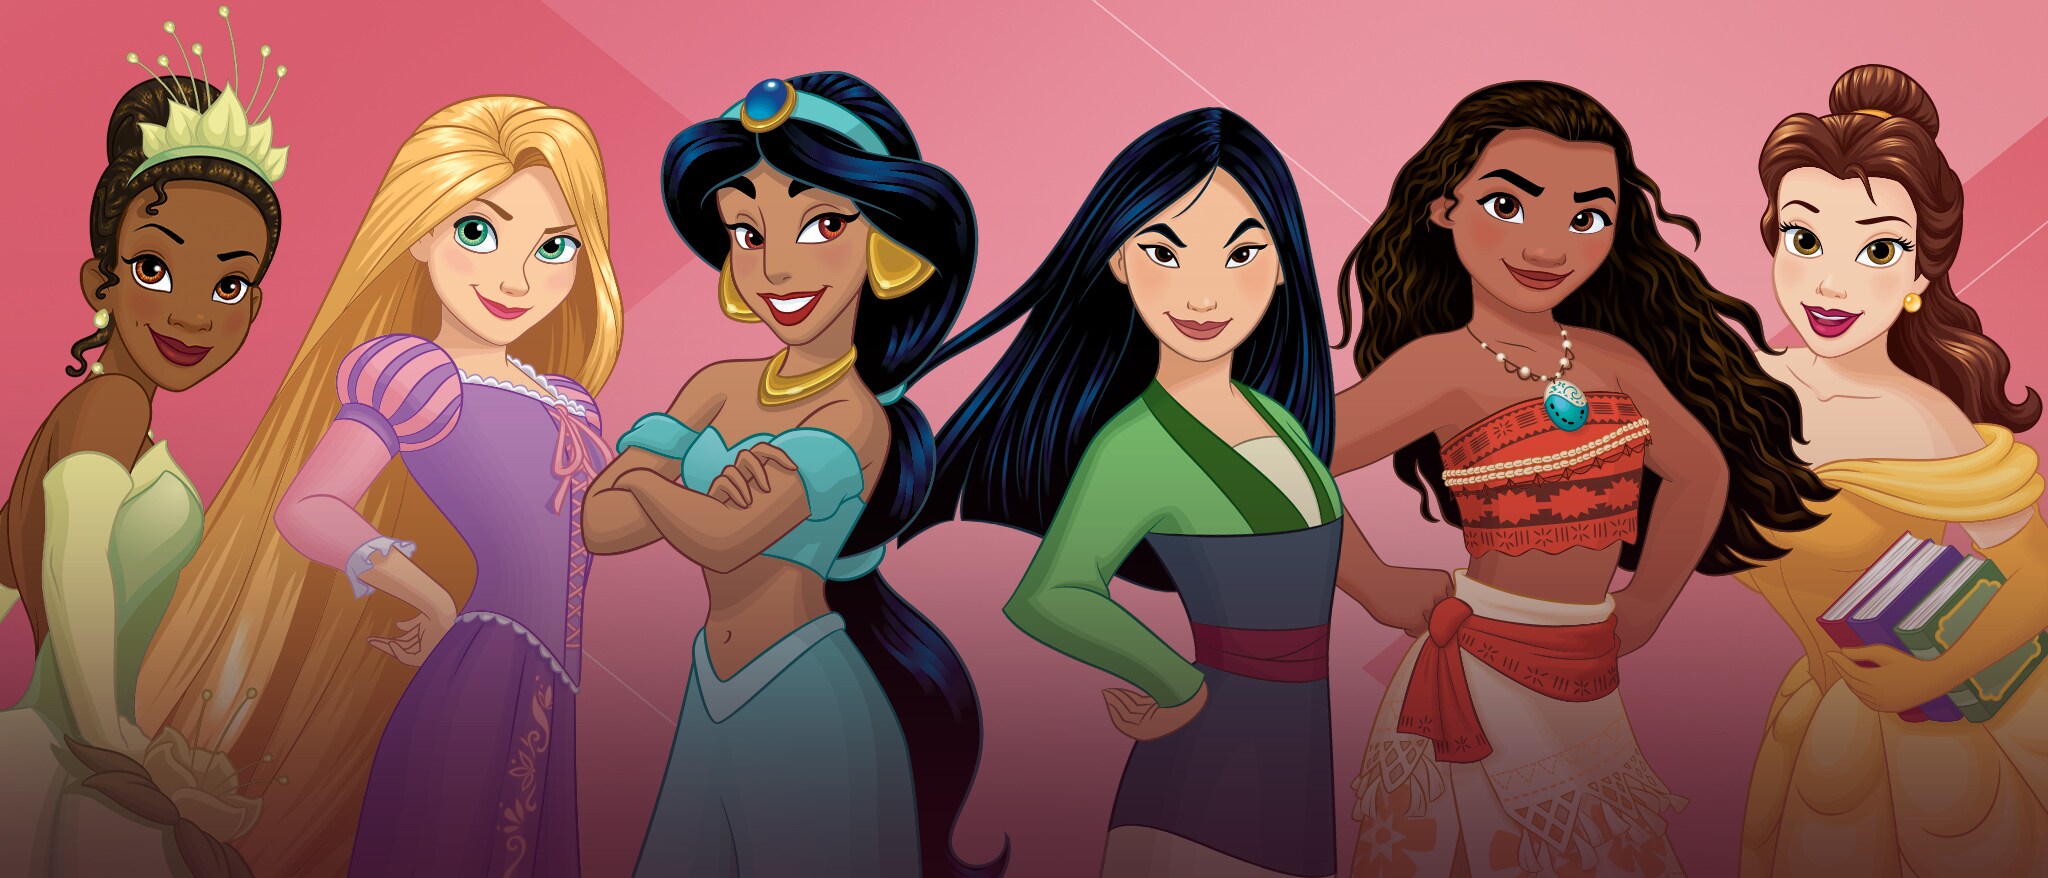 “Amazing Full 4K Collection of Over 999 Disney Princess Images”